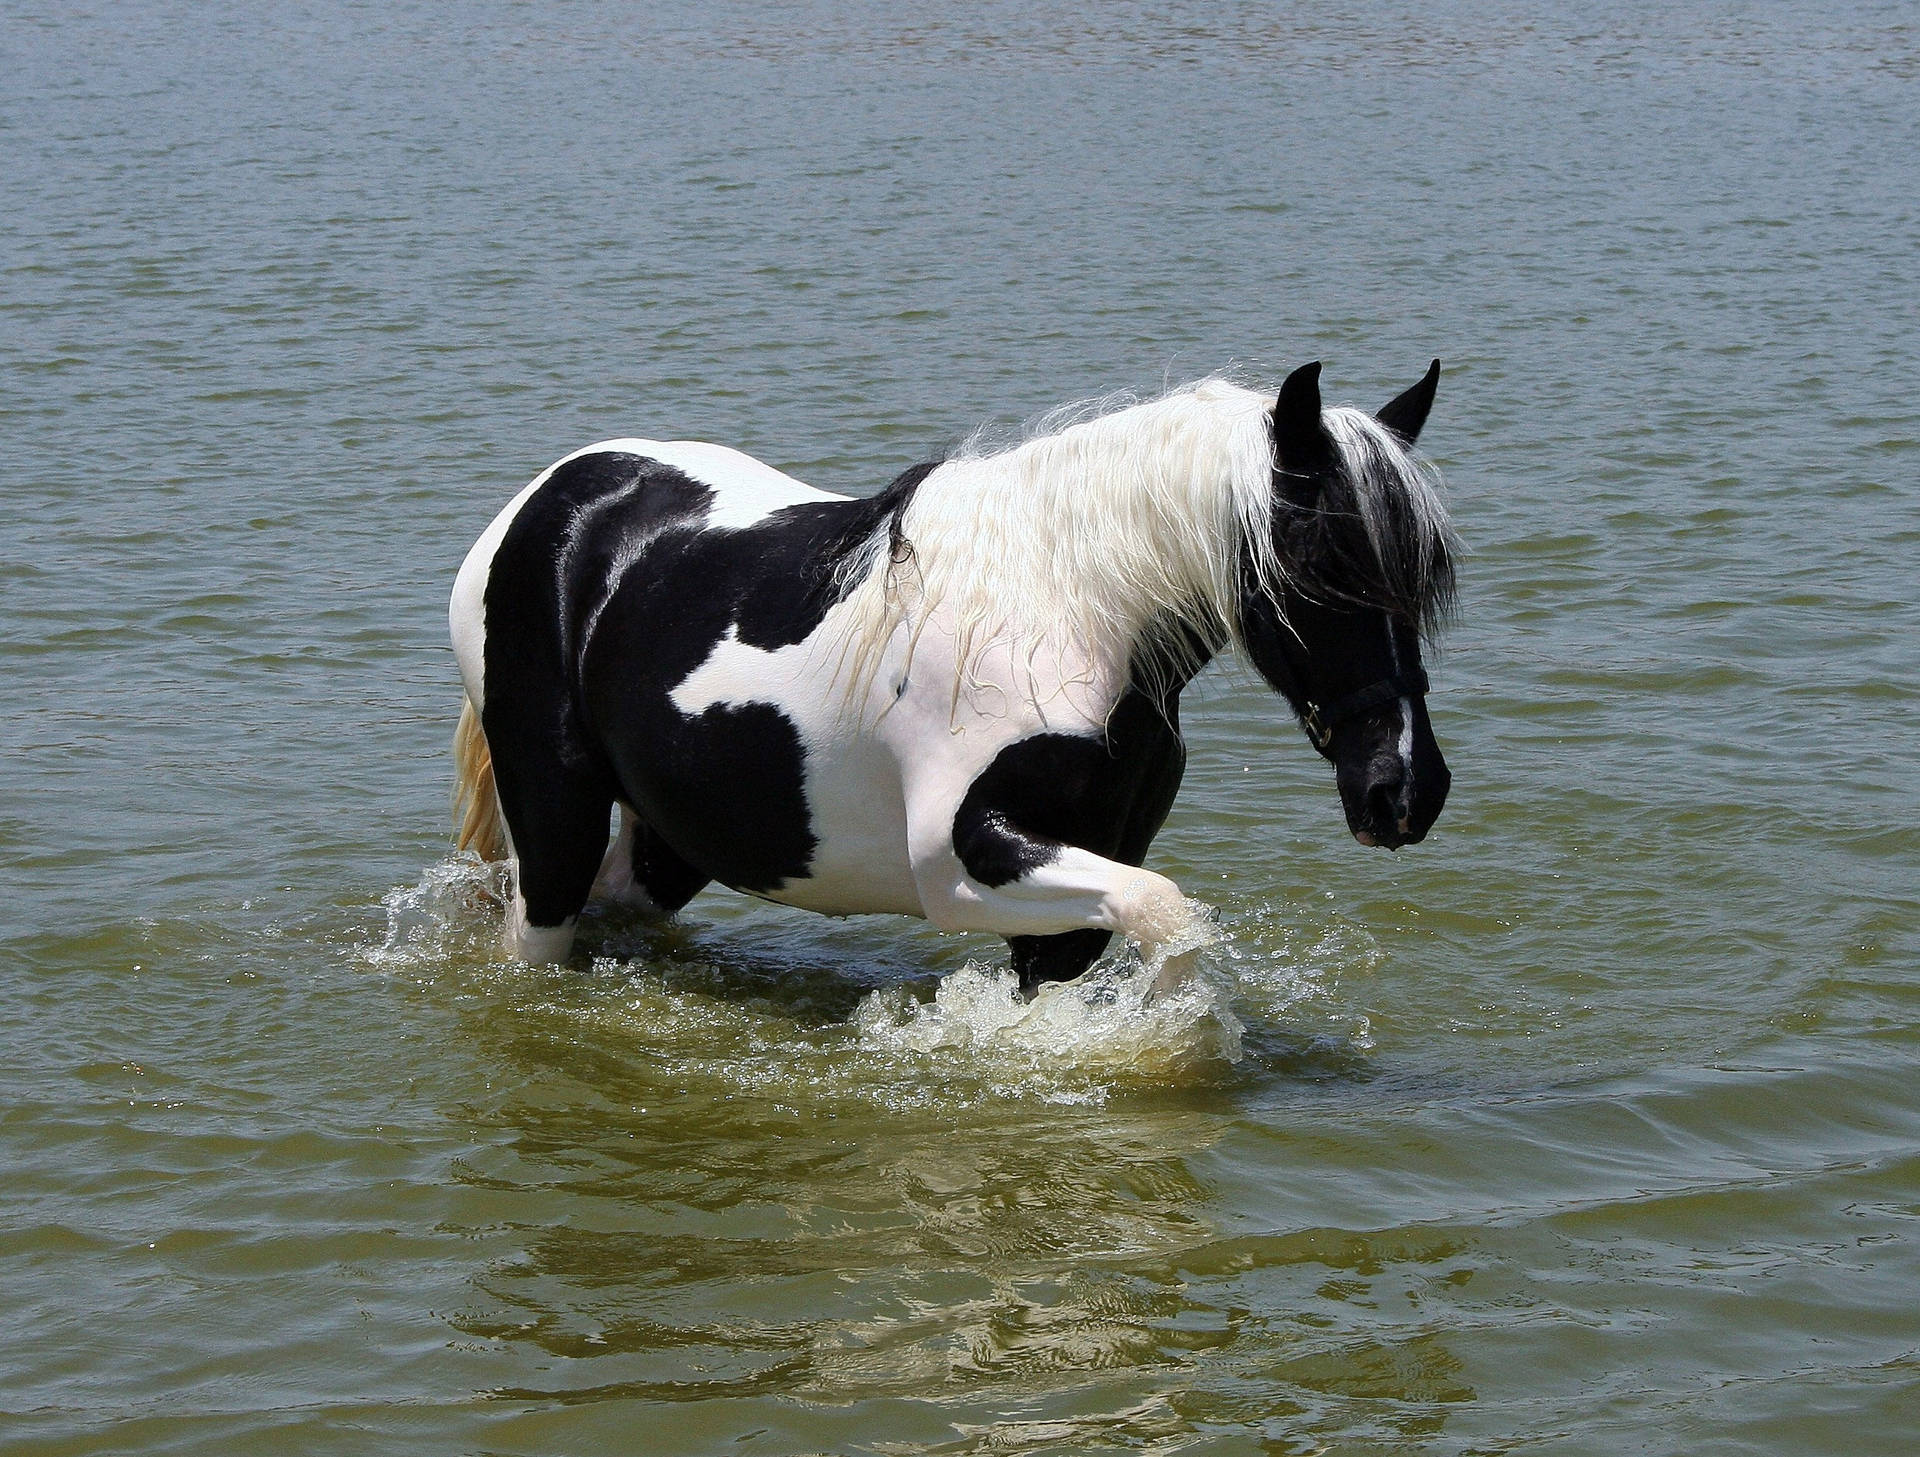 "Resilient Pinto Horse Enjoys a Splash in the Water" Wallpaper